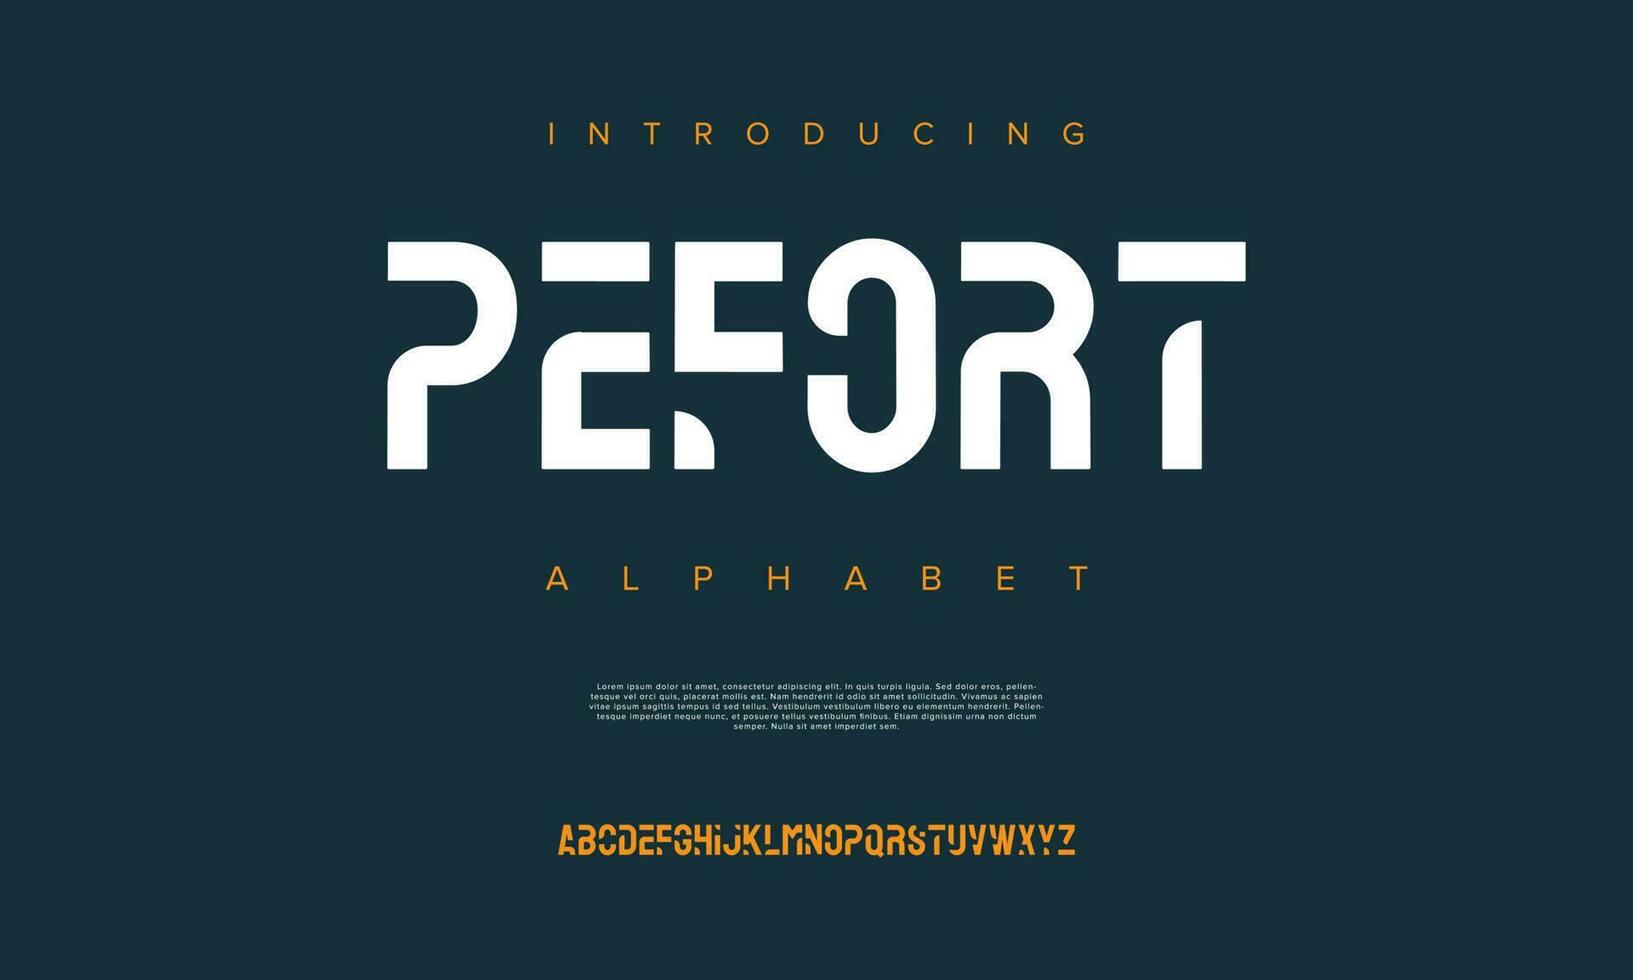 Pefort abstract digital technology logo font alphabet. Minimal modern urban fonts for logo, brand etc. Typography typeface uppercase lowercase and number. vector illustration